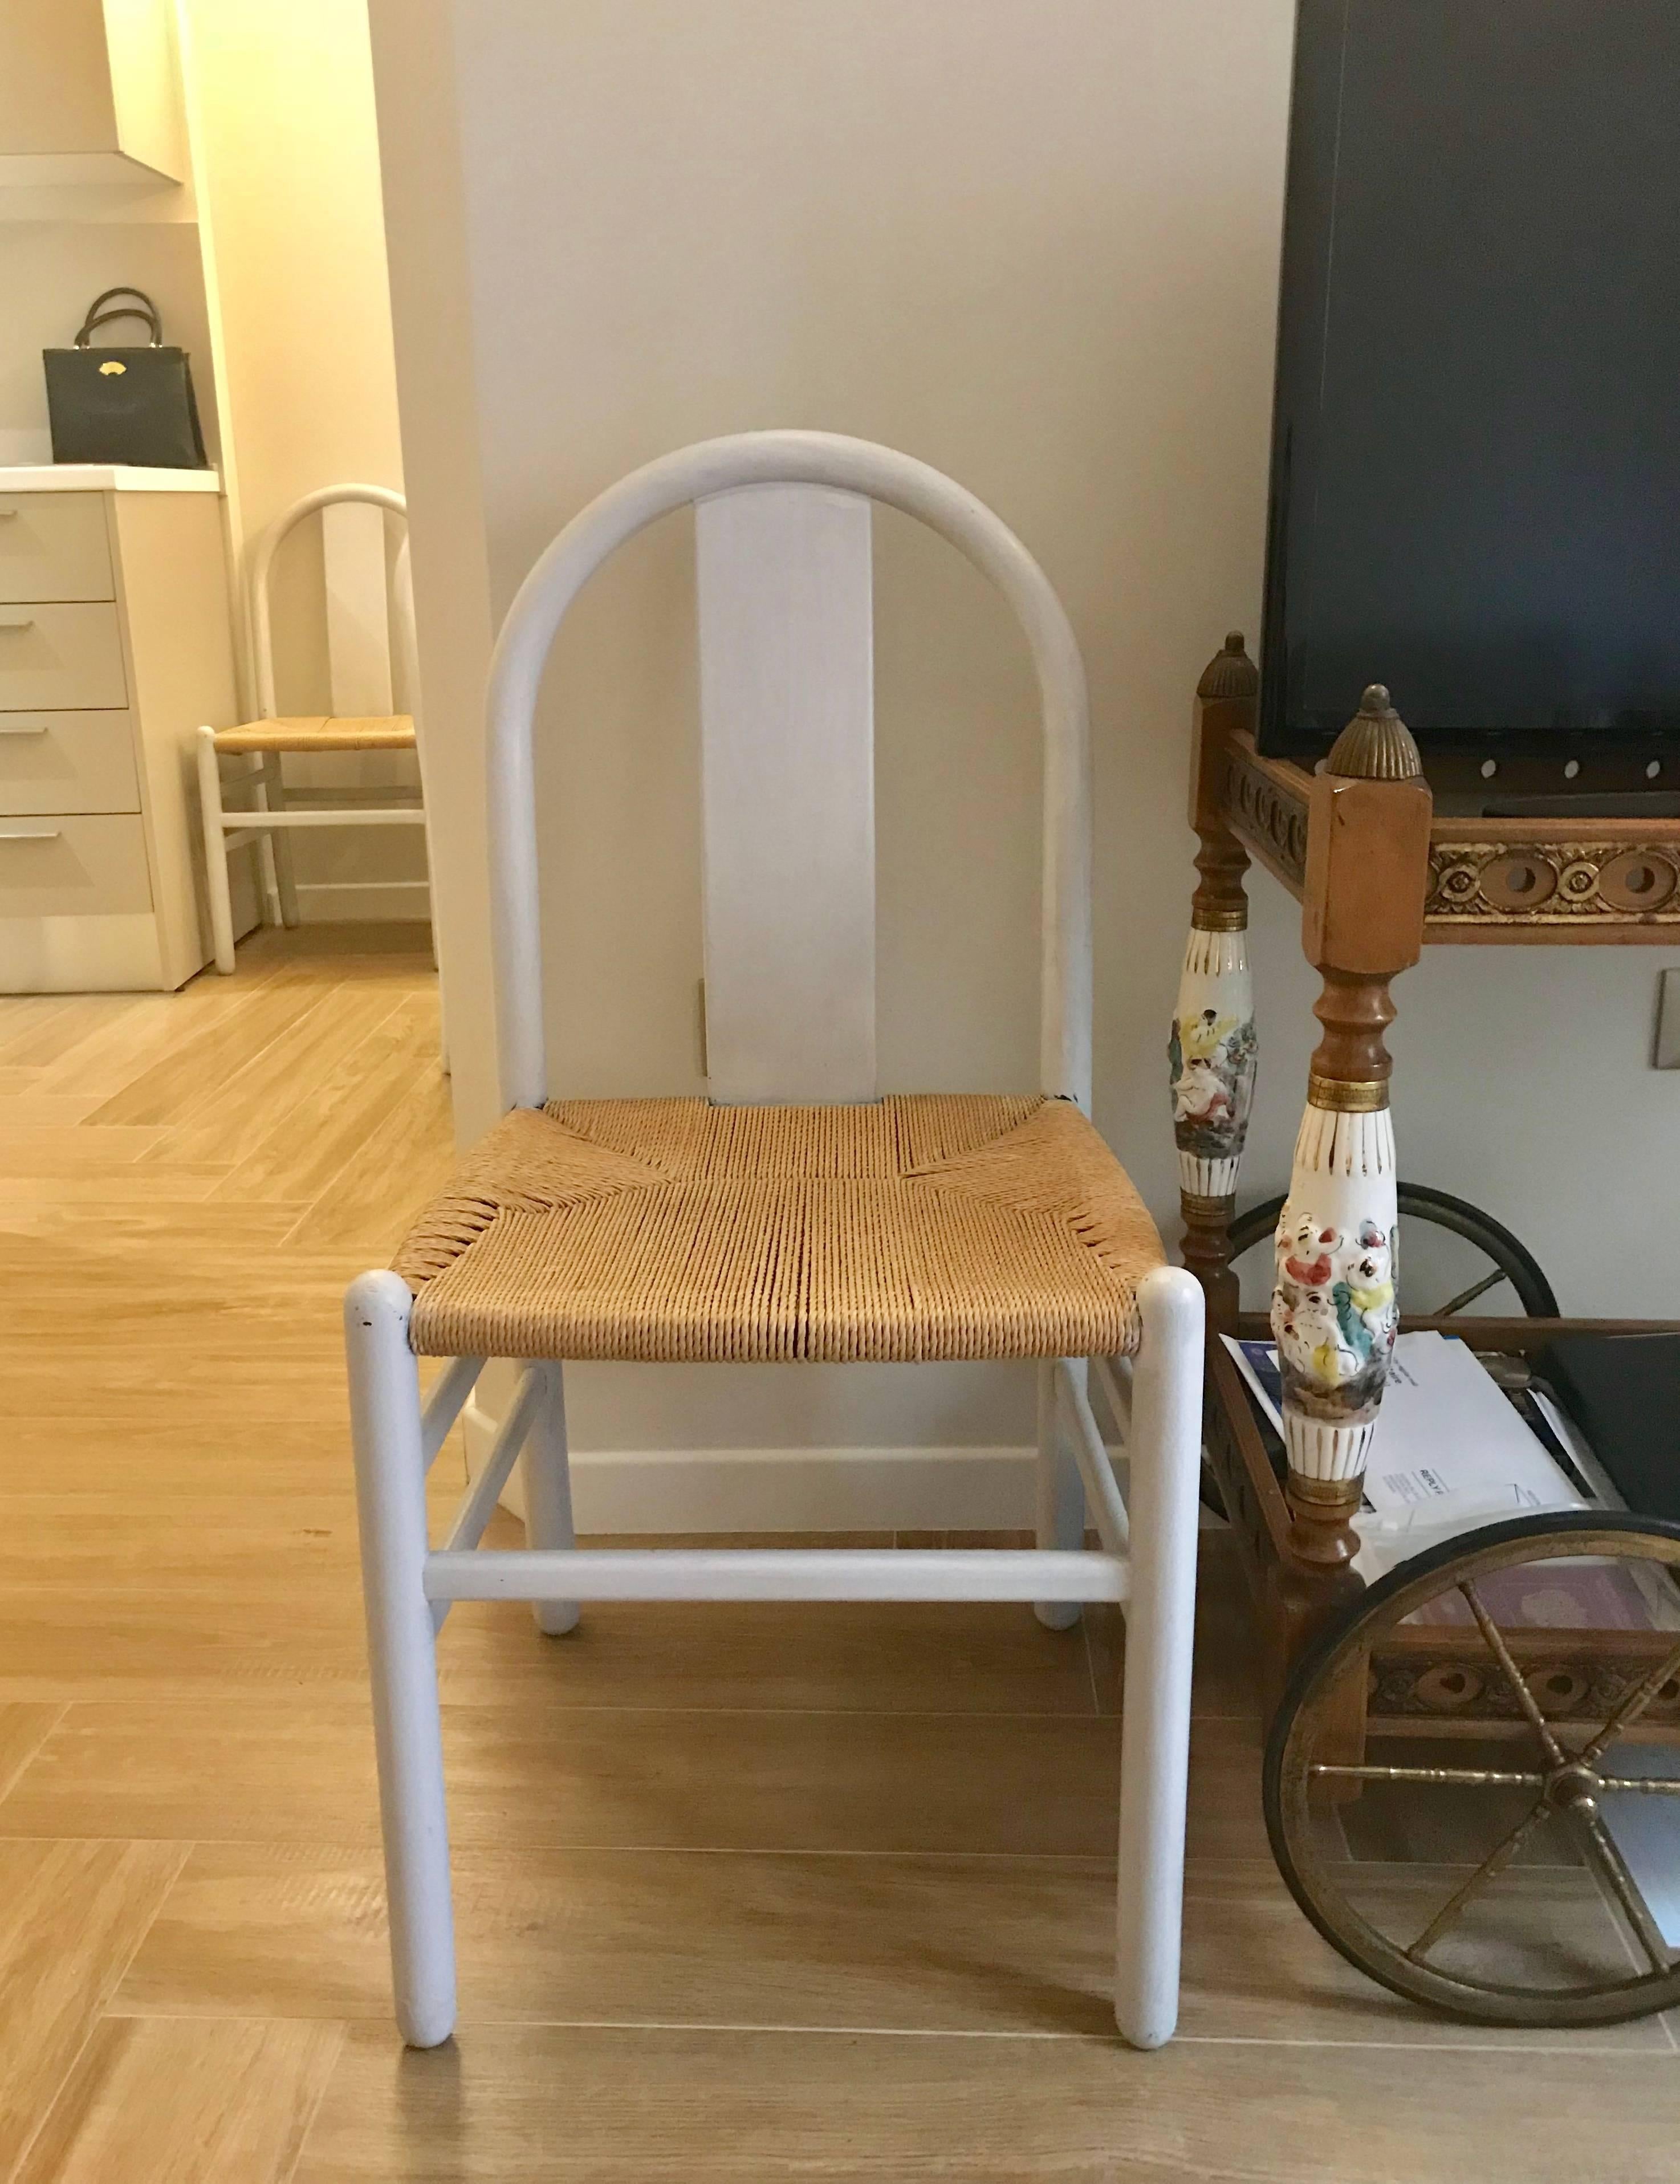 All Four Cane Tuscan Wooden Rustic White Chairs, Italy 2